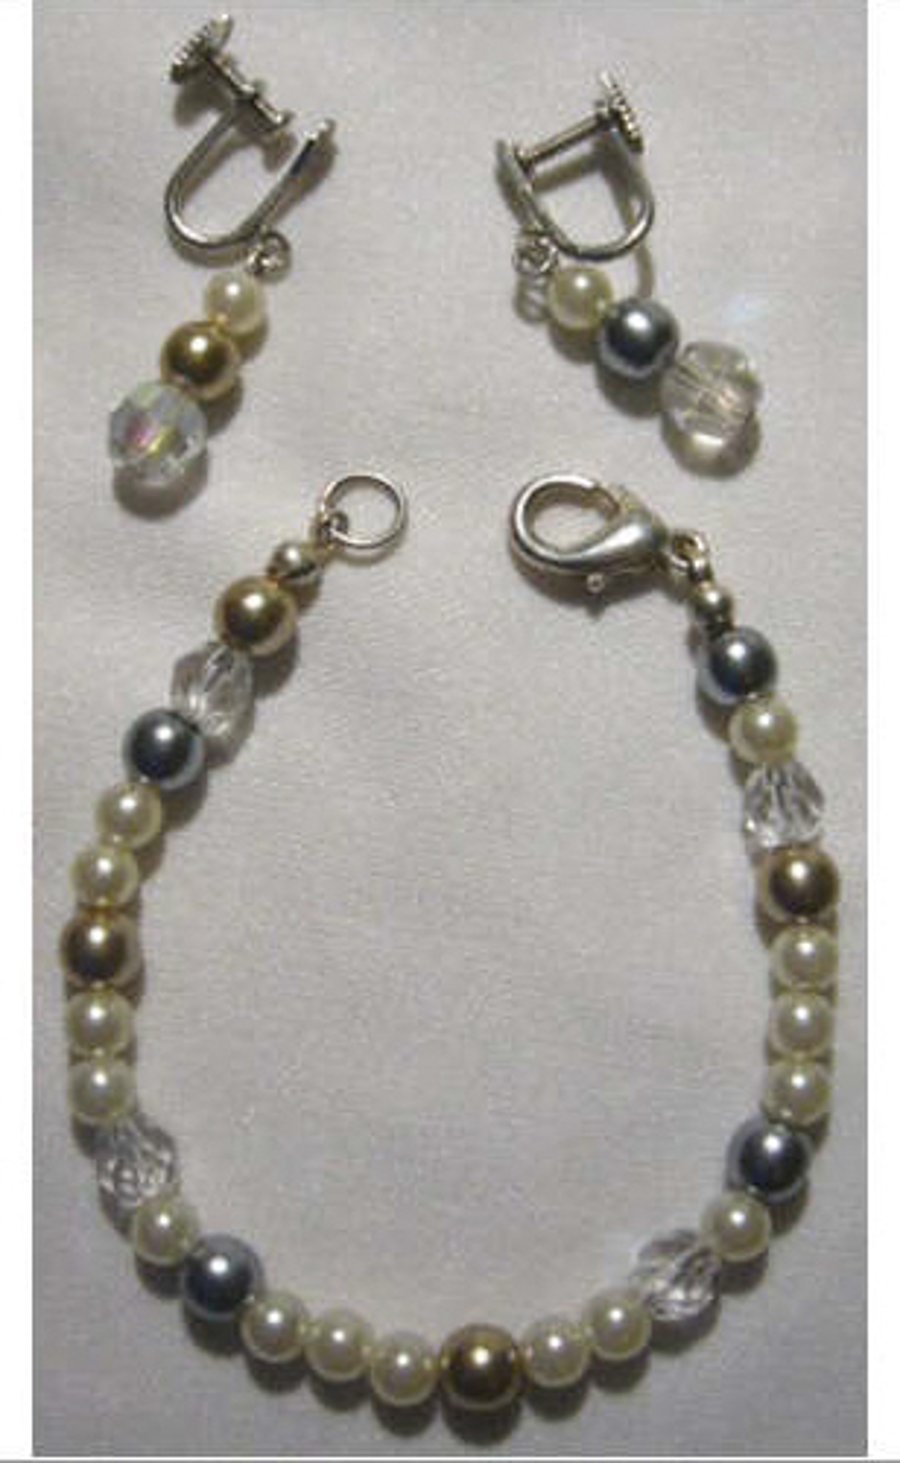 Child's Faux Pearl Bracelet and Earring Set